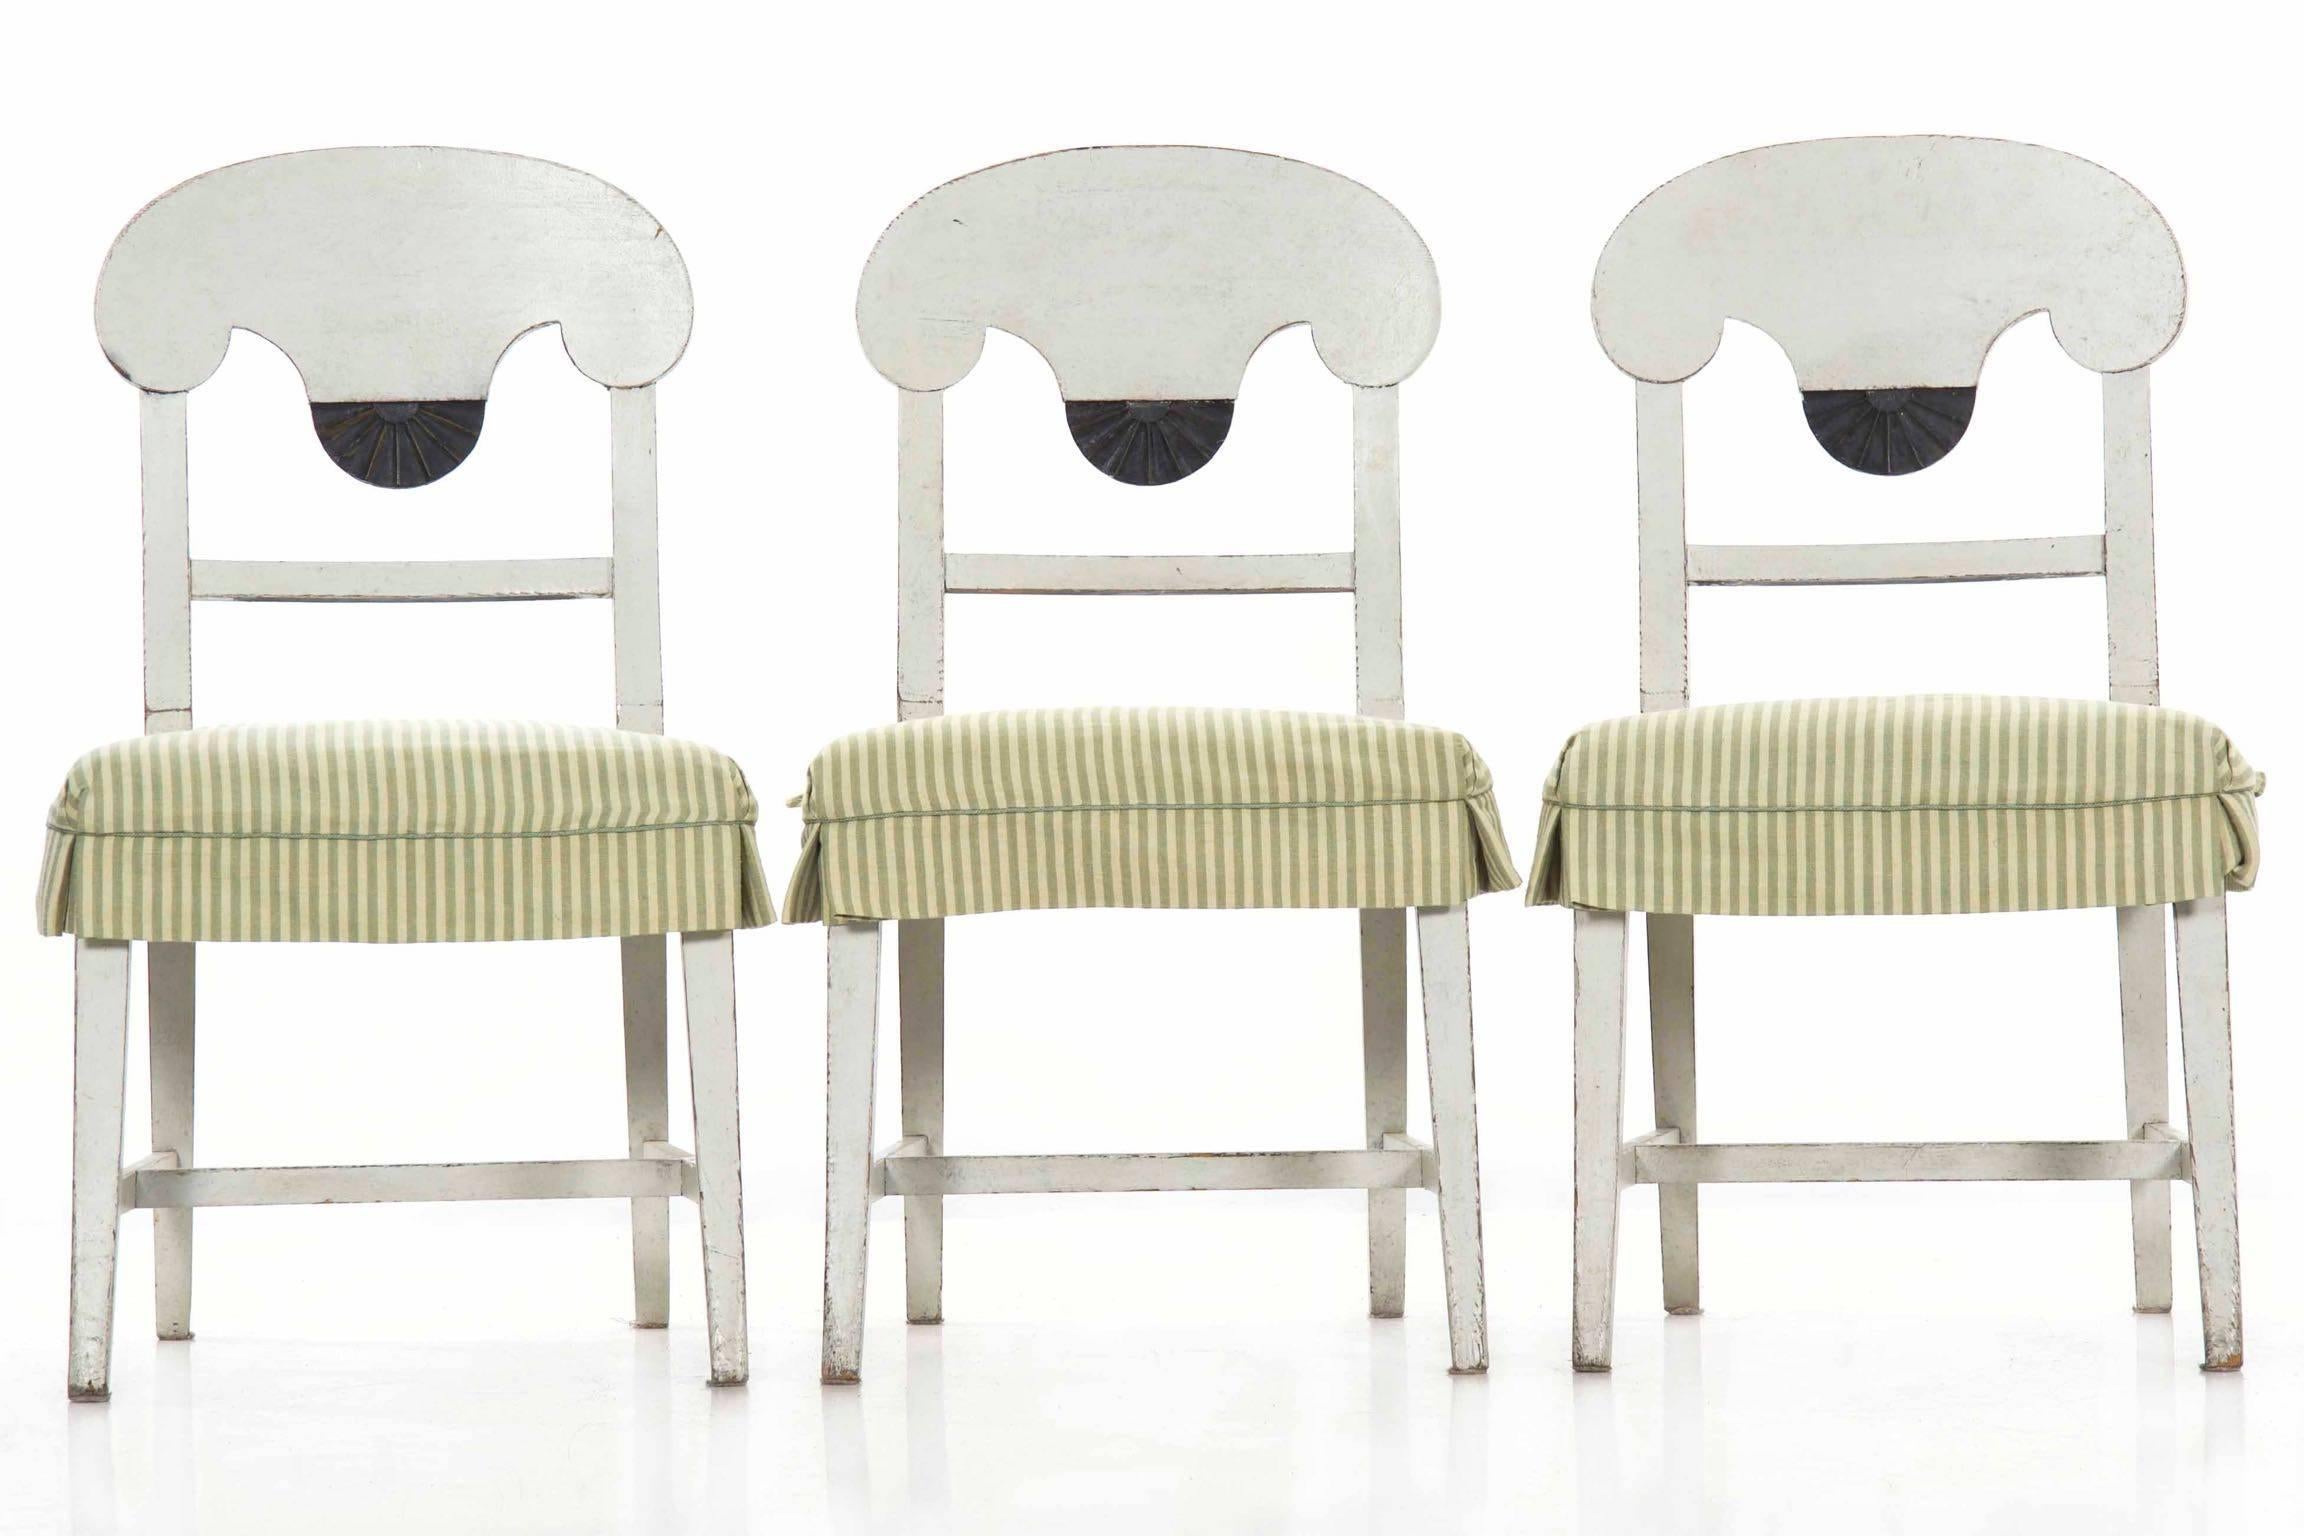 This delightful set of six chairs crafted in the Swedish Gustavian taste are finished in a gorgeous and nicely worn mottled white paint. The back of each chair is clearly influenced by the Empire forms of the early 19th century, the dramatic curving